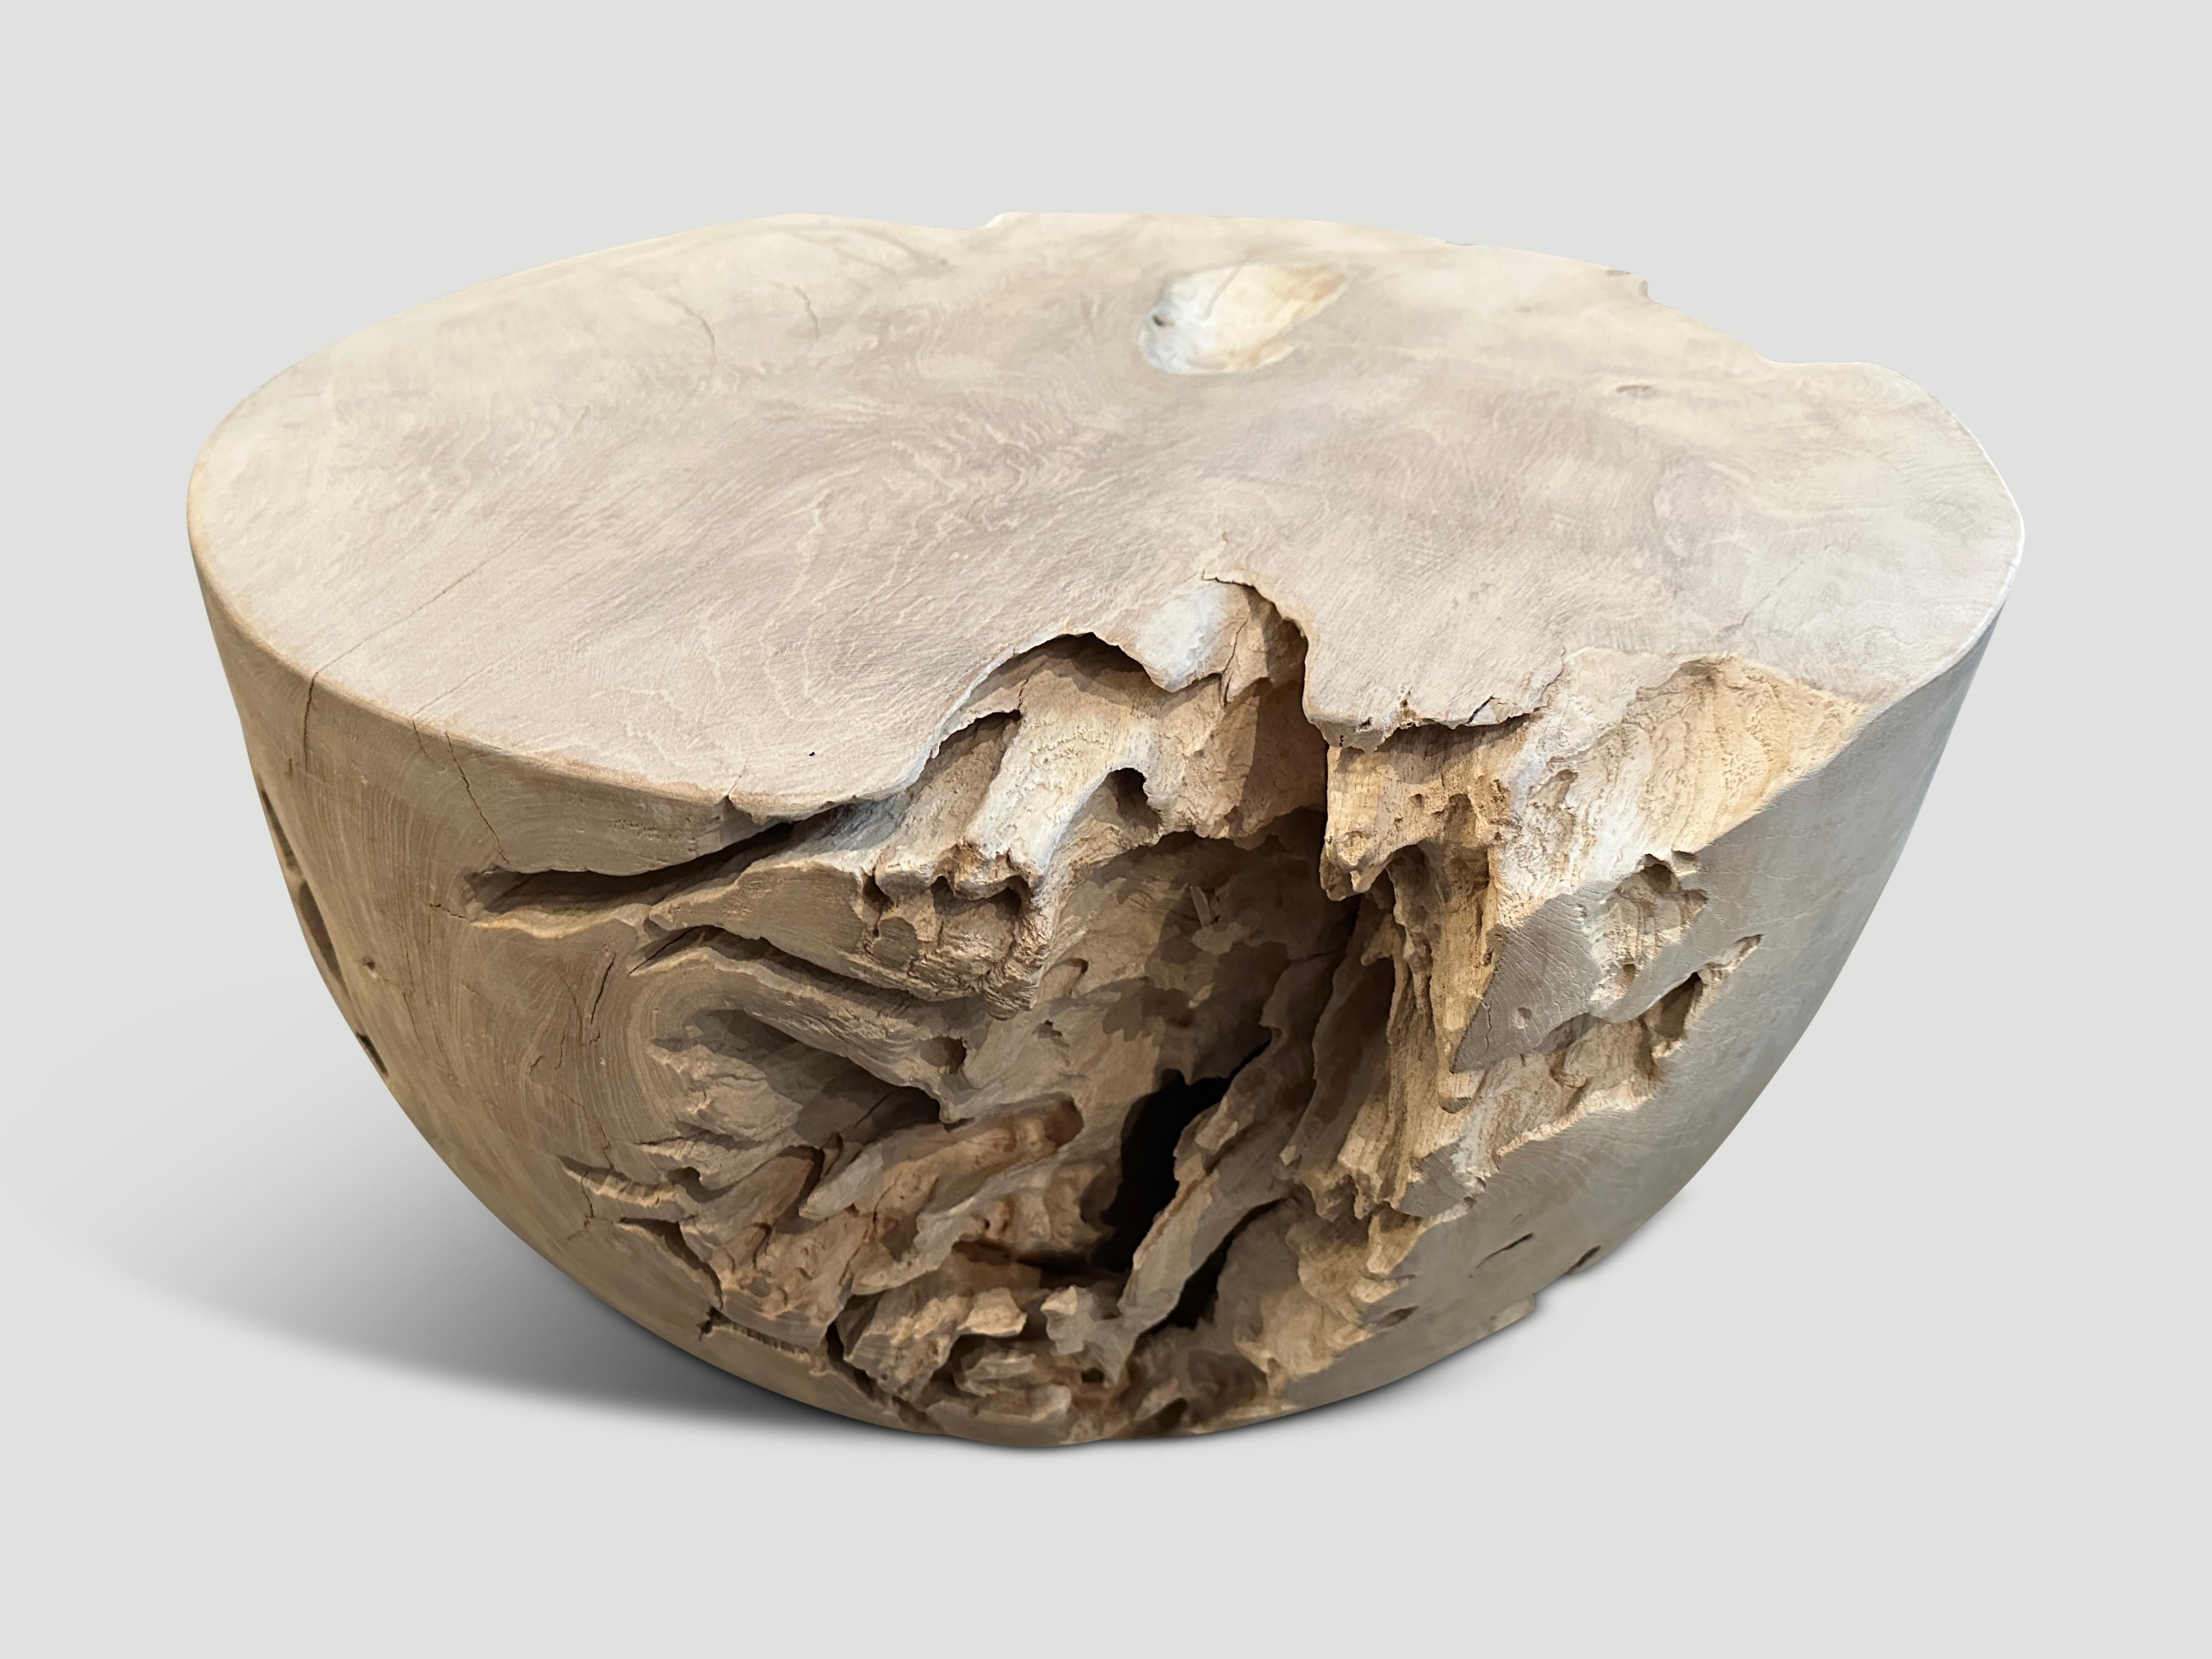 Reclaimed teak root coffee table hand carved into a drum shape whilst respecting the natural organic wood. We added a light white wash revealing the beautiful wood grain. Both usable and sculptural.

The St. Barts Collection features an exciting